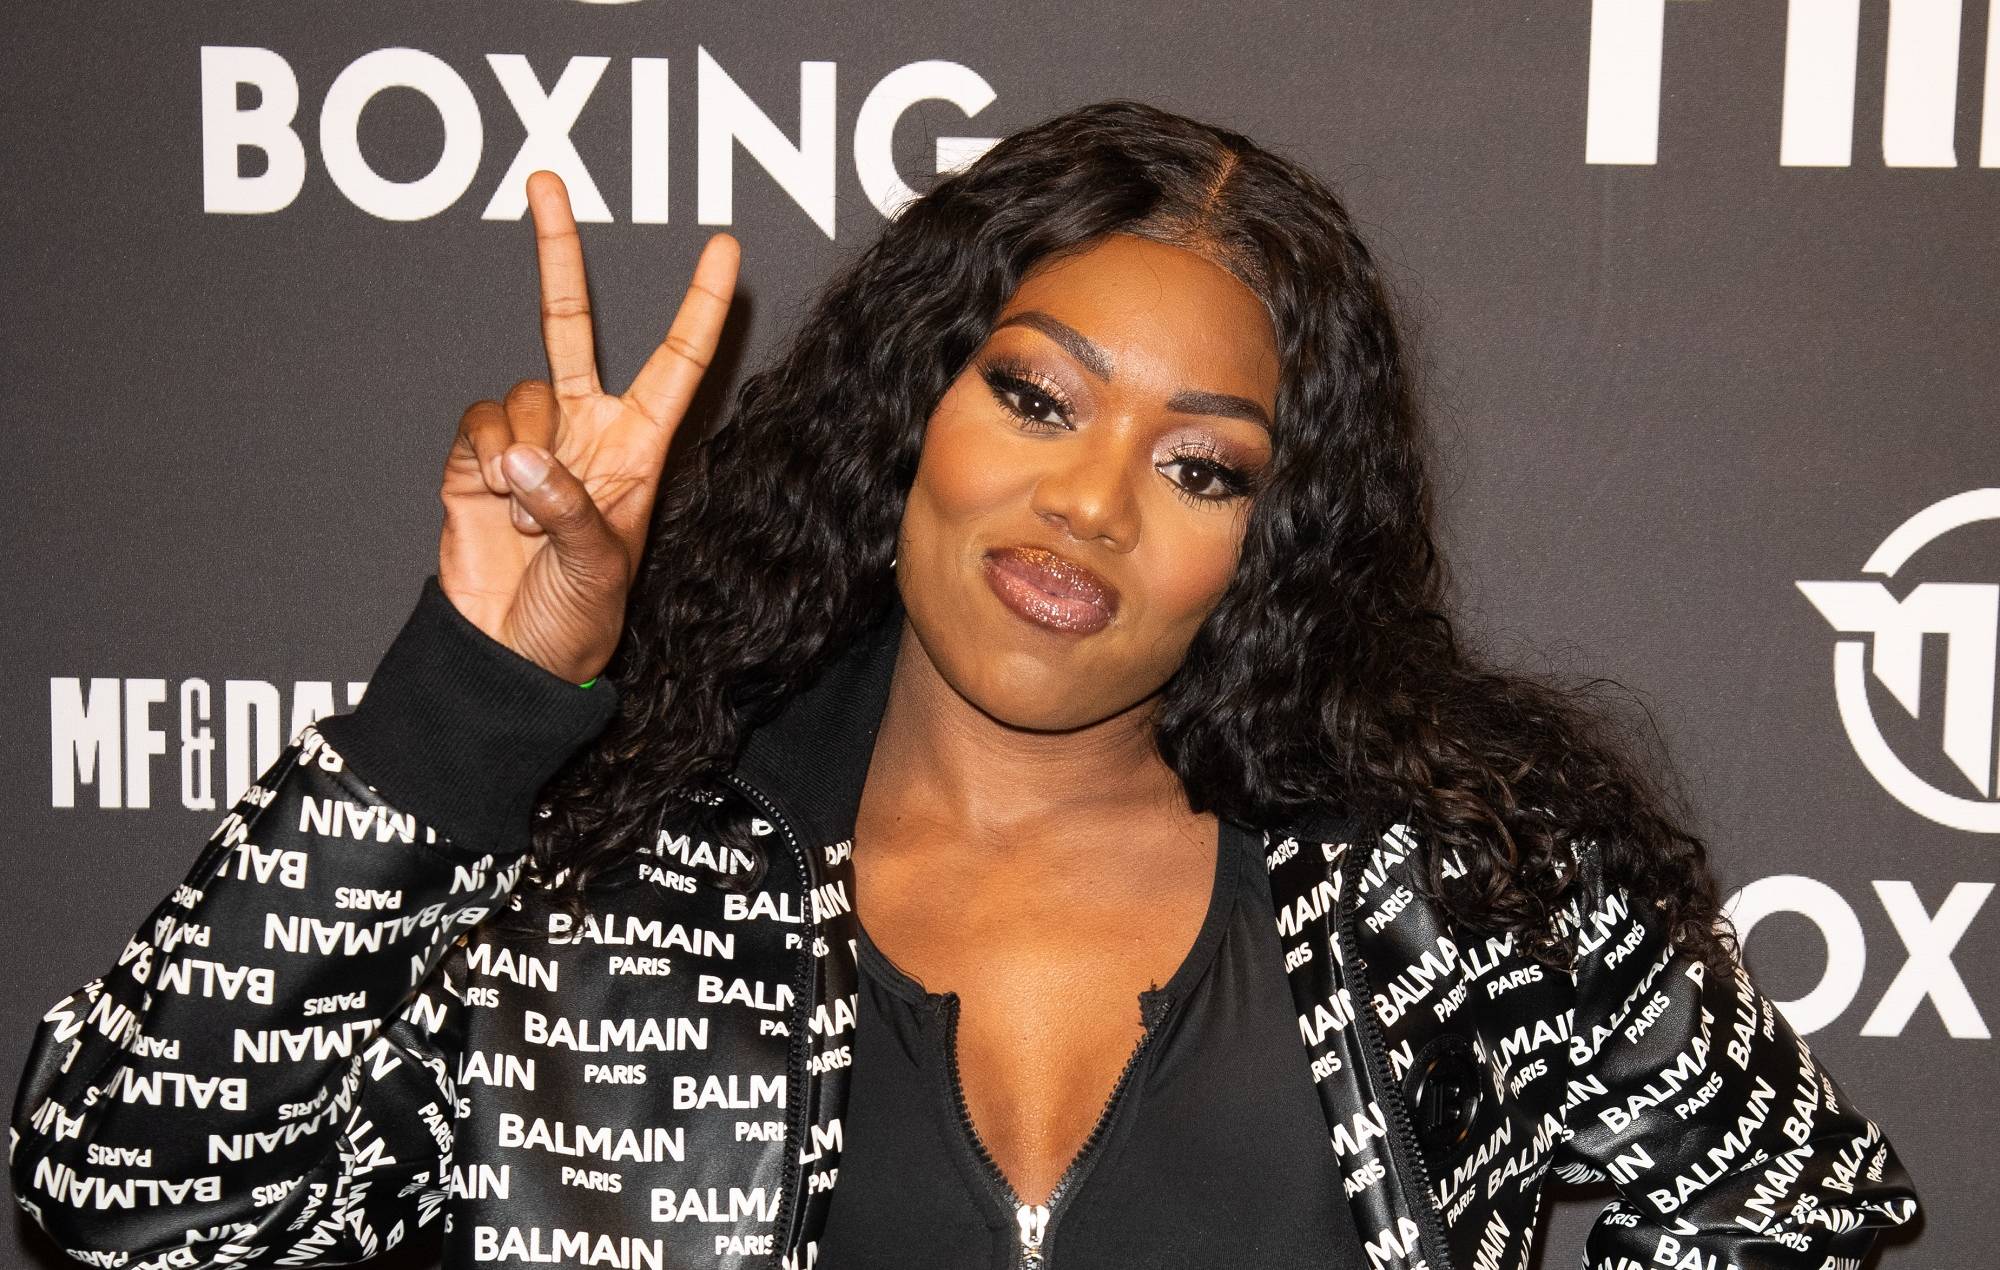 Lady Leshurr says her “career has been ruined” after being cleared of assault